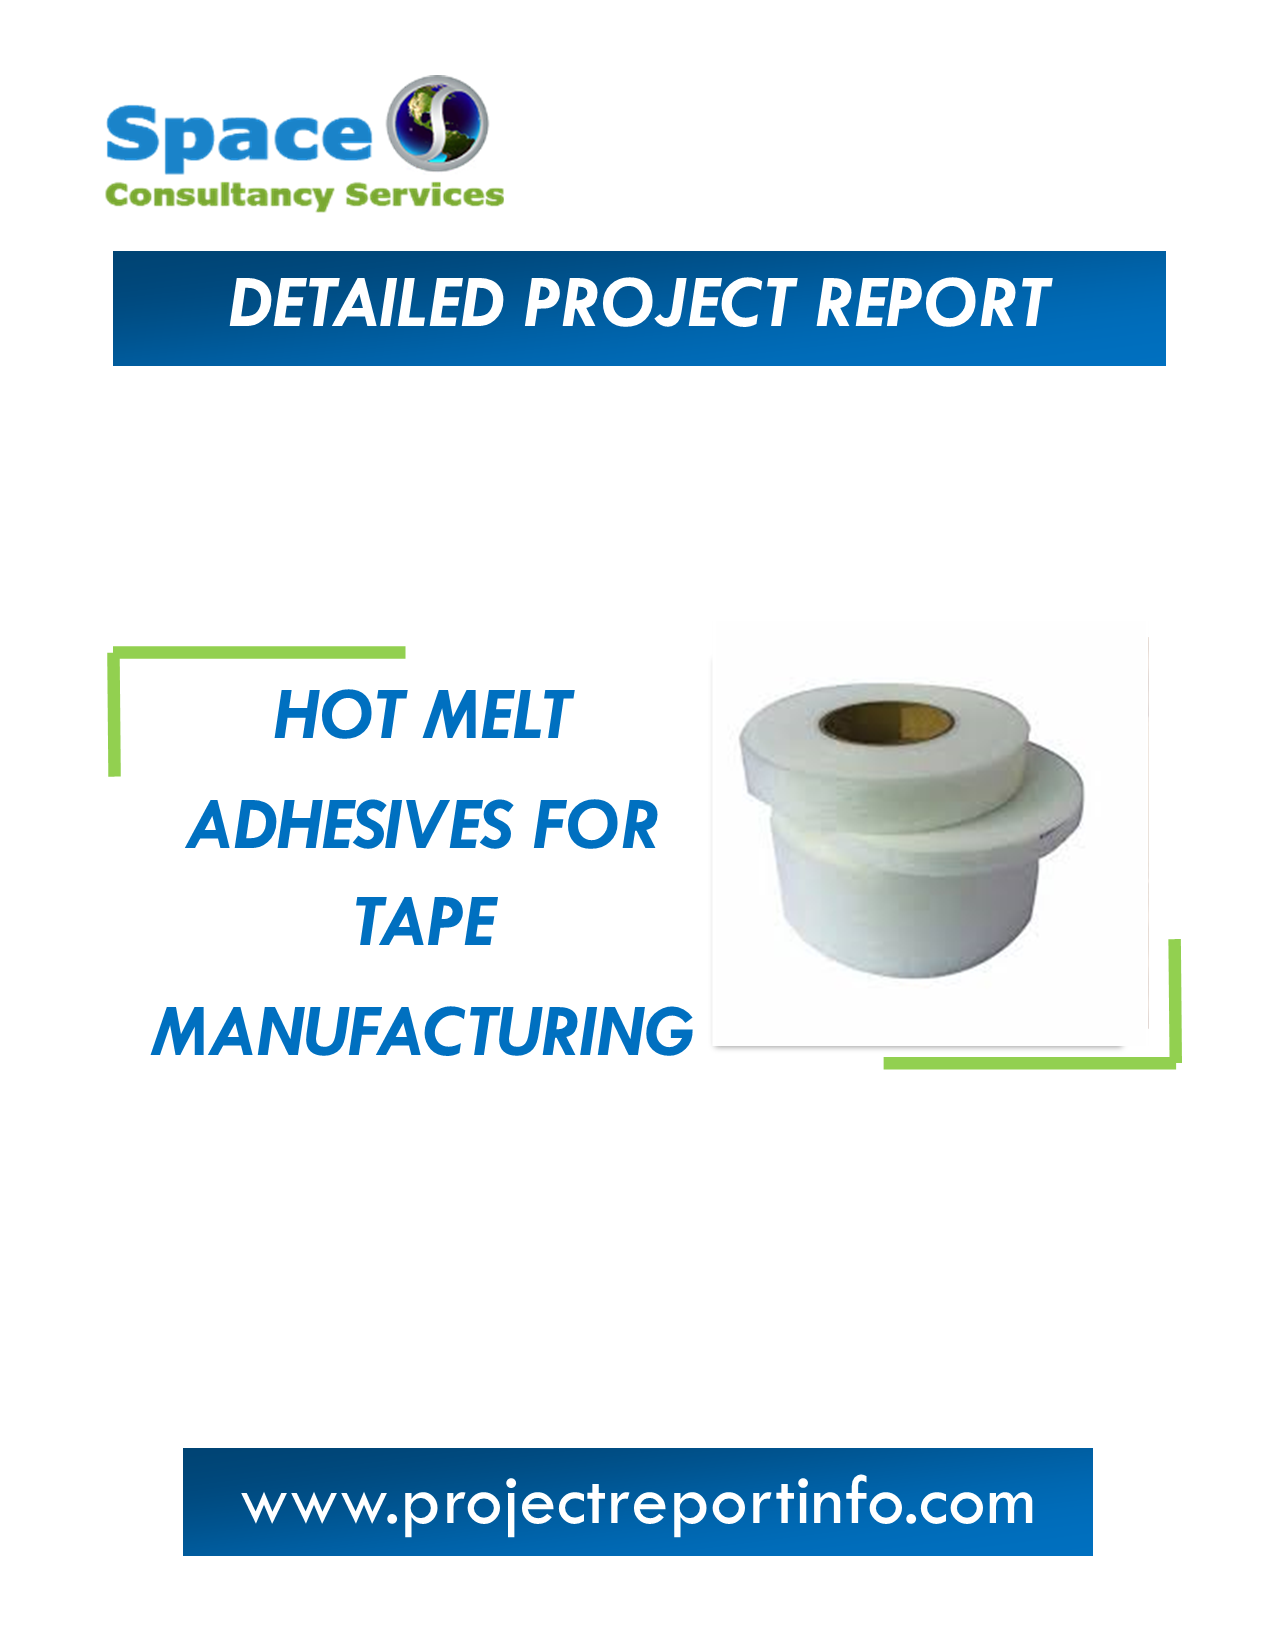 Project Report on Hot Melt Adhesives for Tape